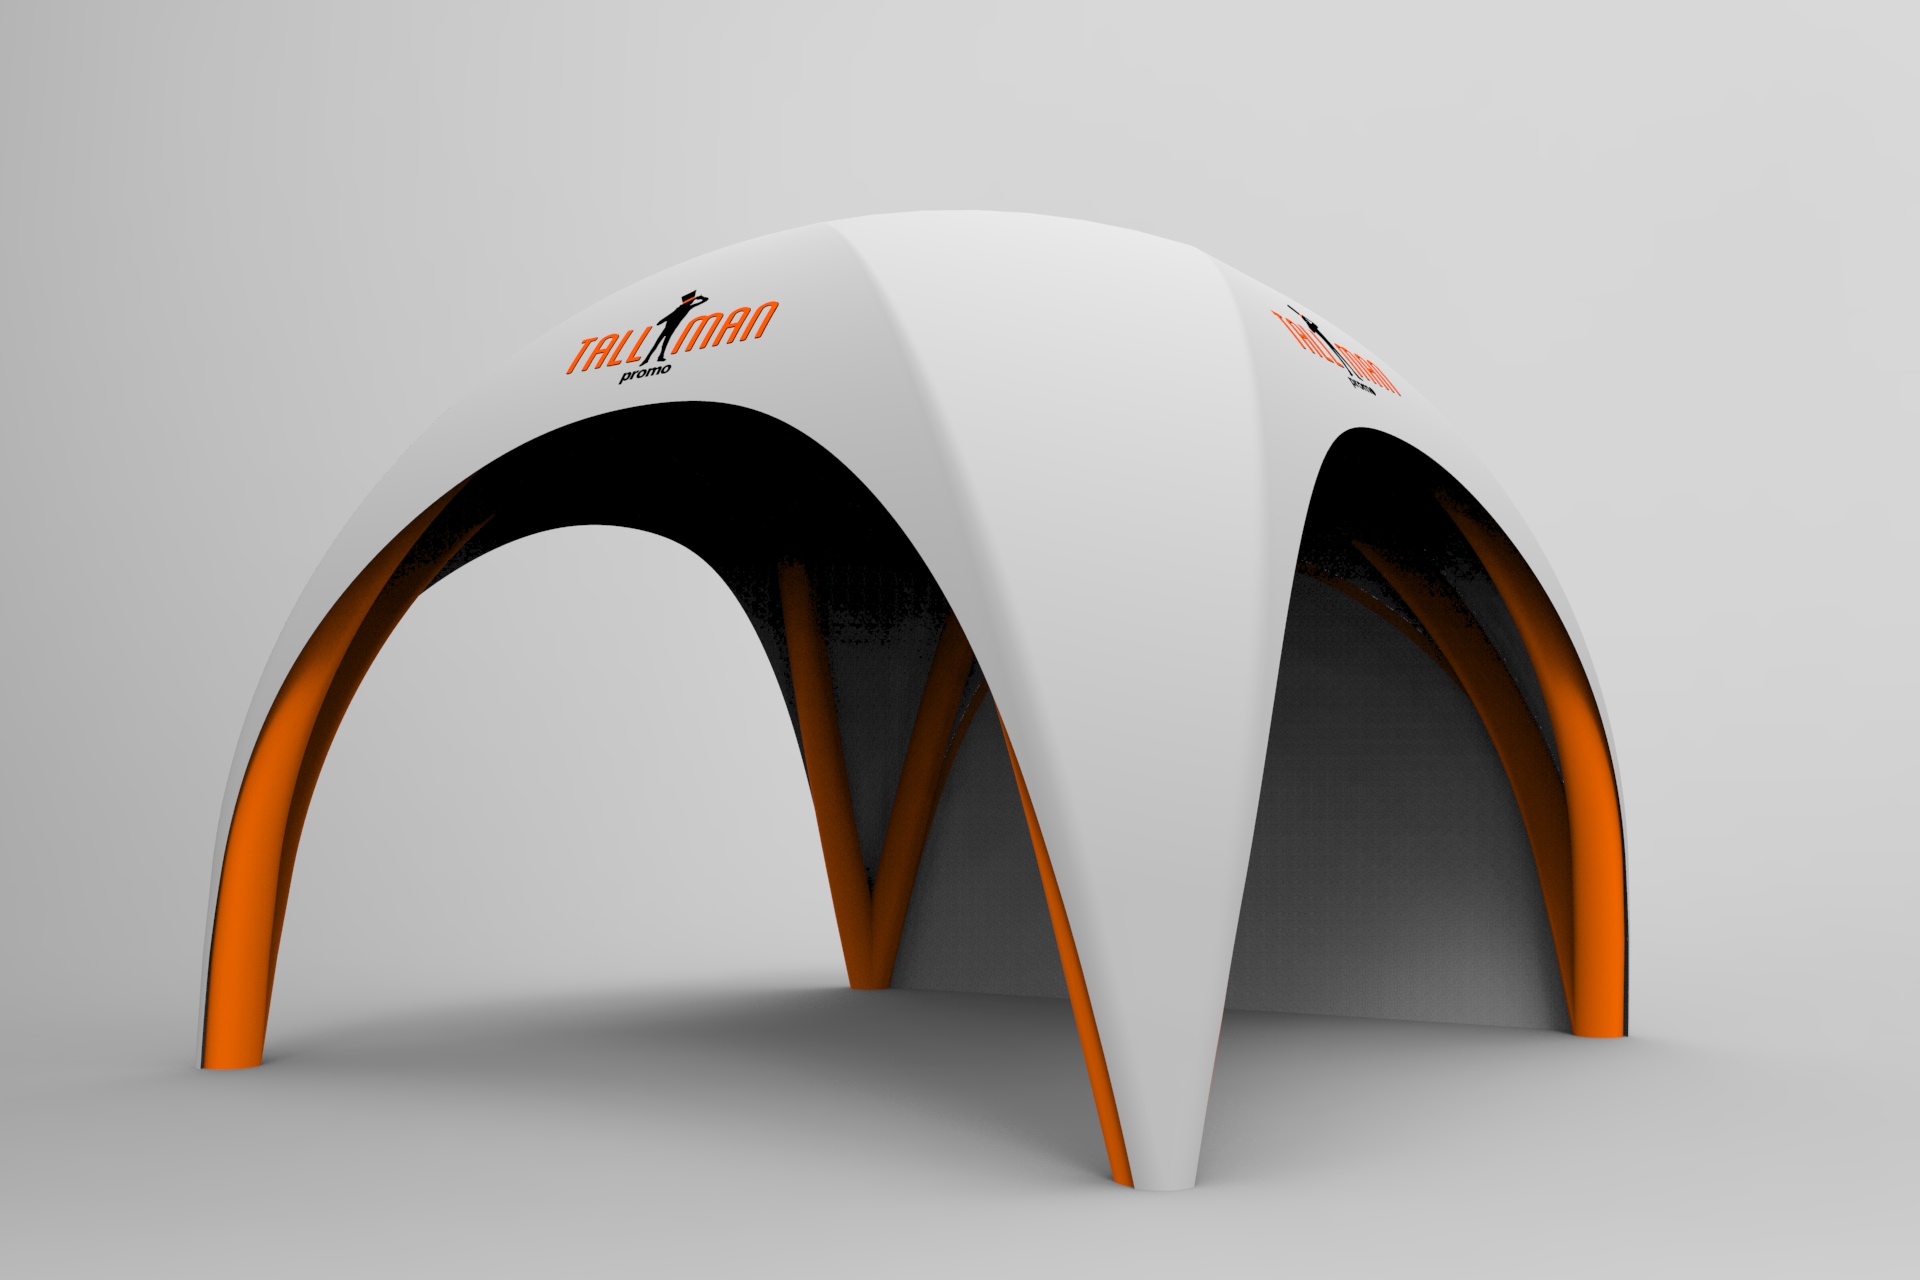 Air tight dome tent 